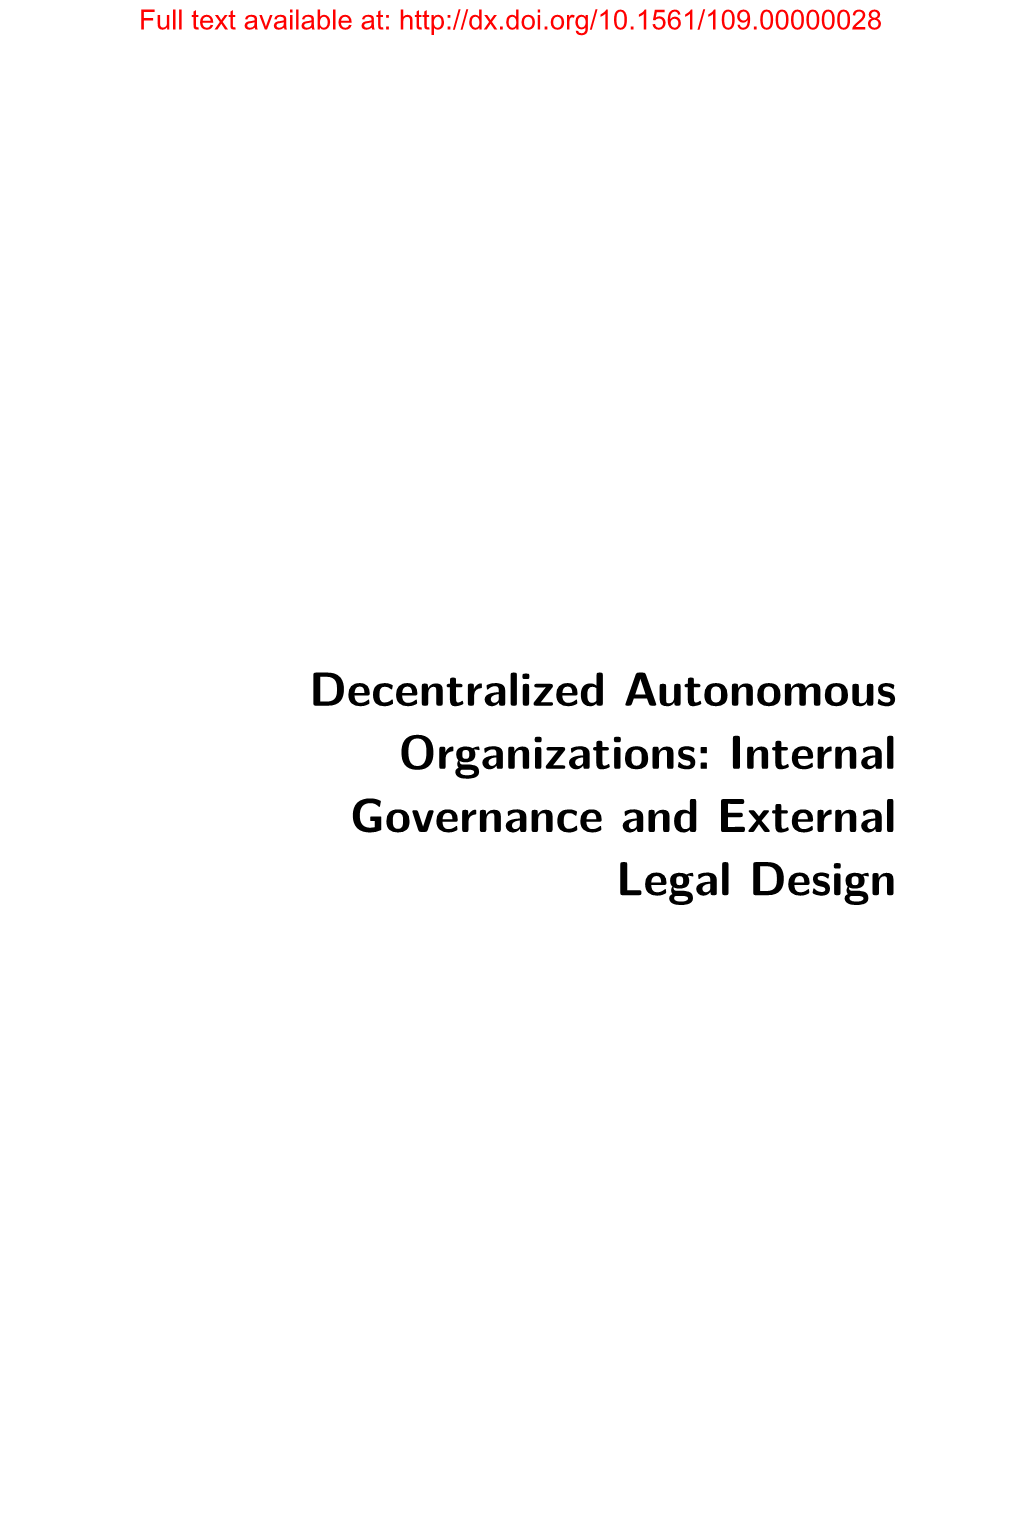 Decentralized Autonomous Organizations: Internal Governance and External Legal Design Full Text Available At